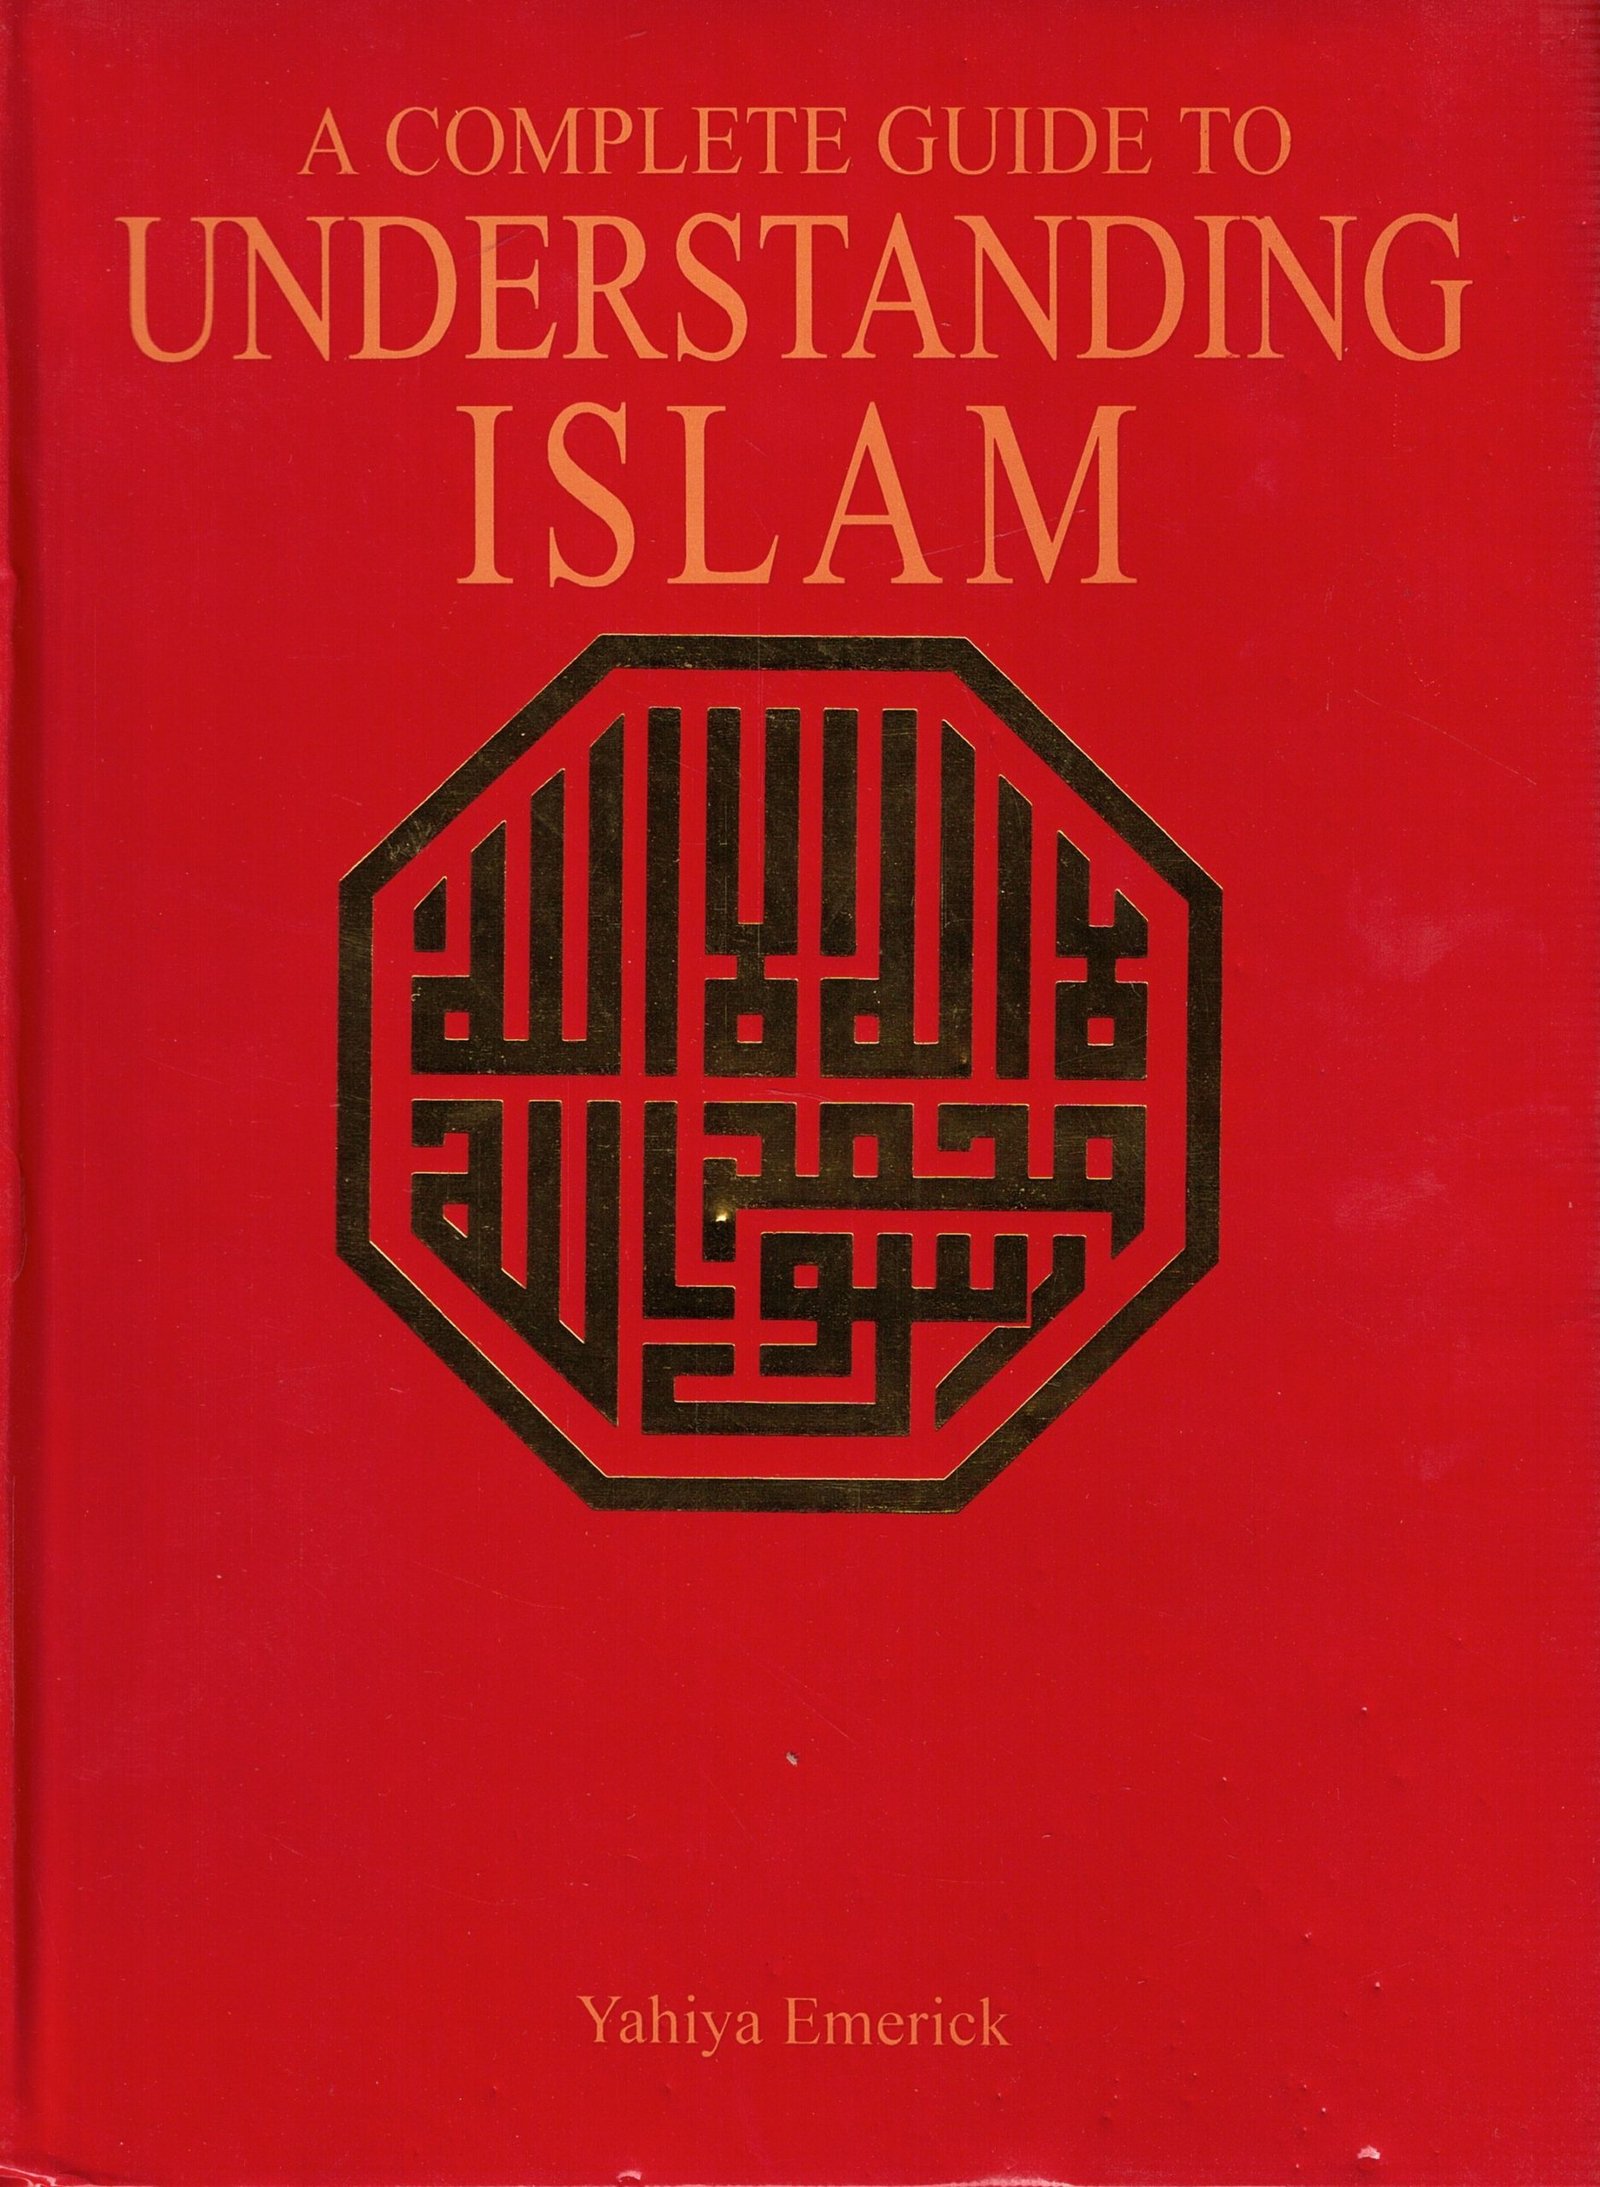 A Complete Guide to Understanding Islam